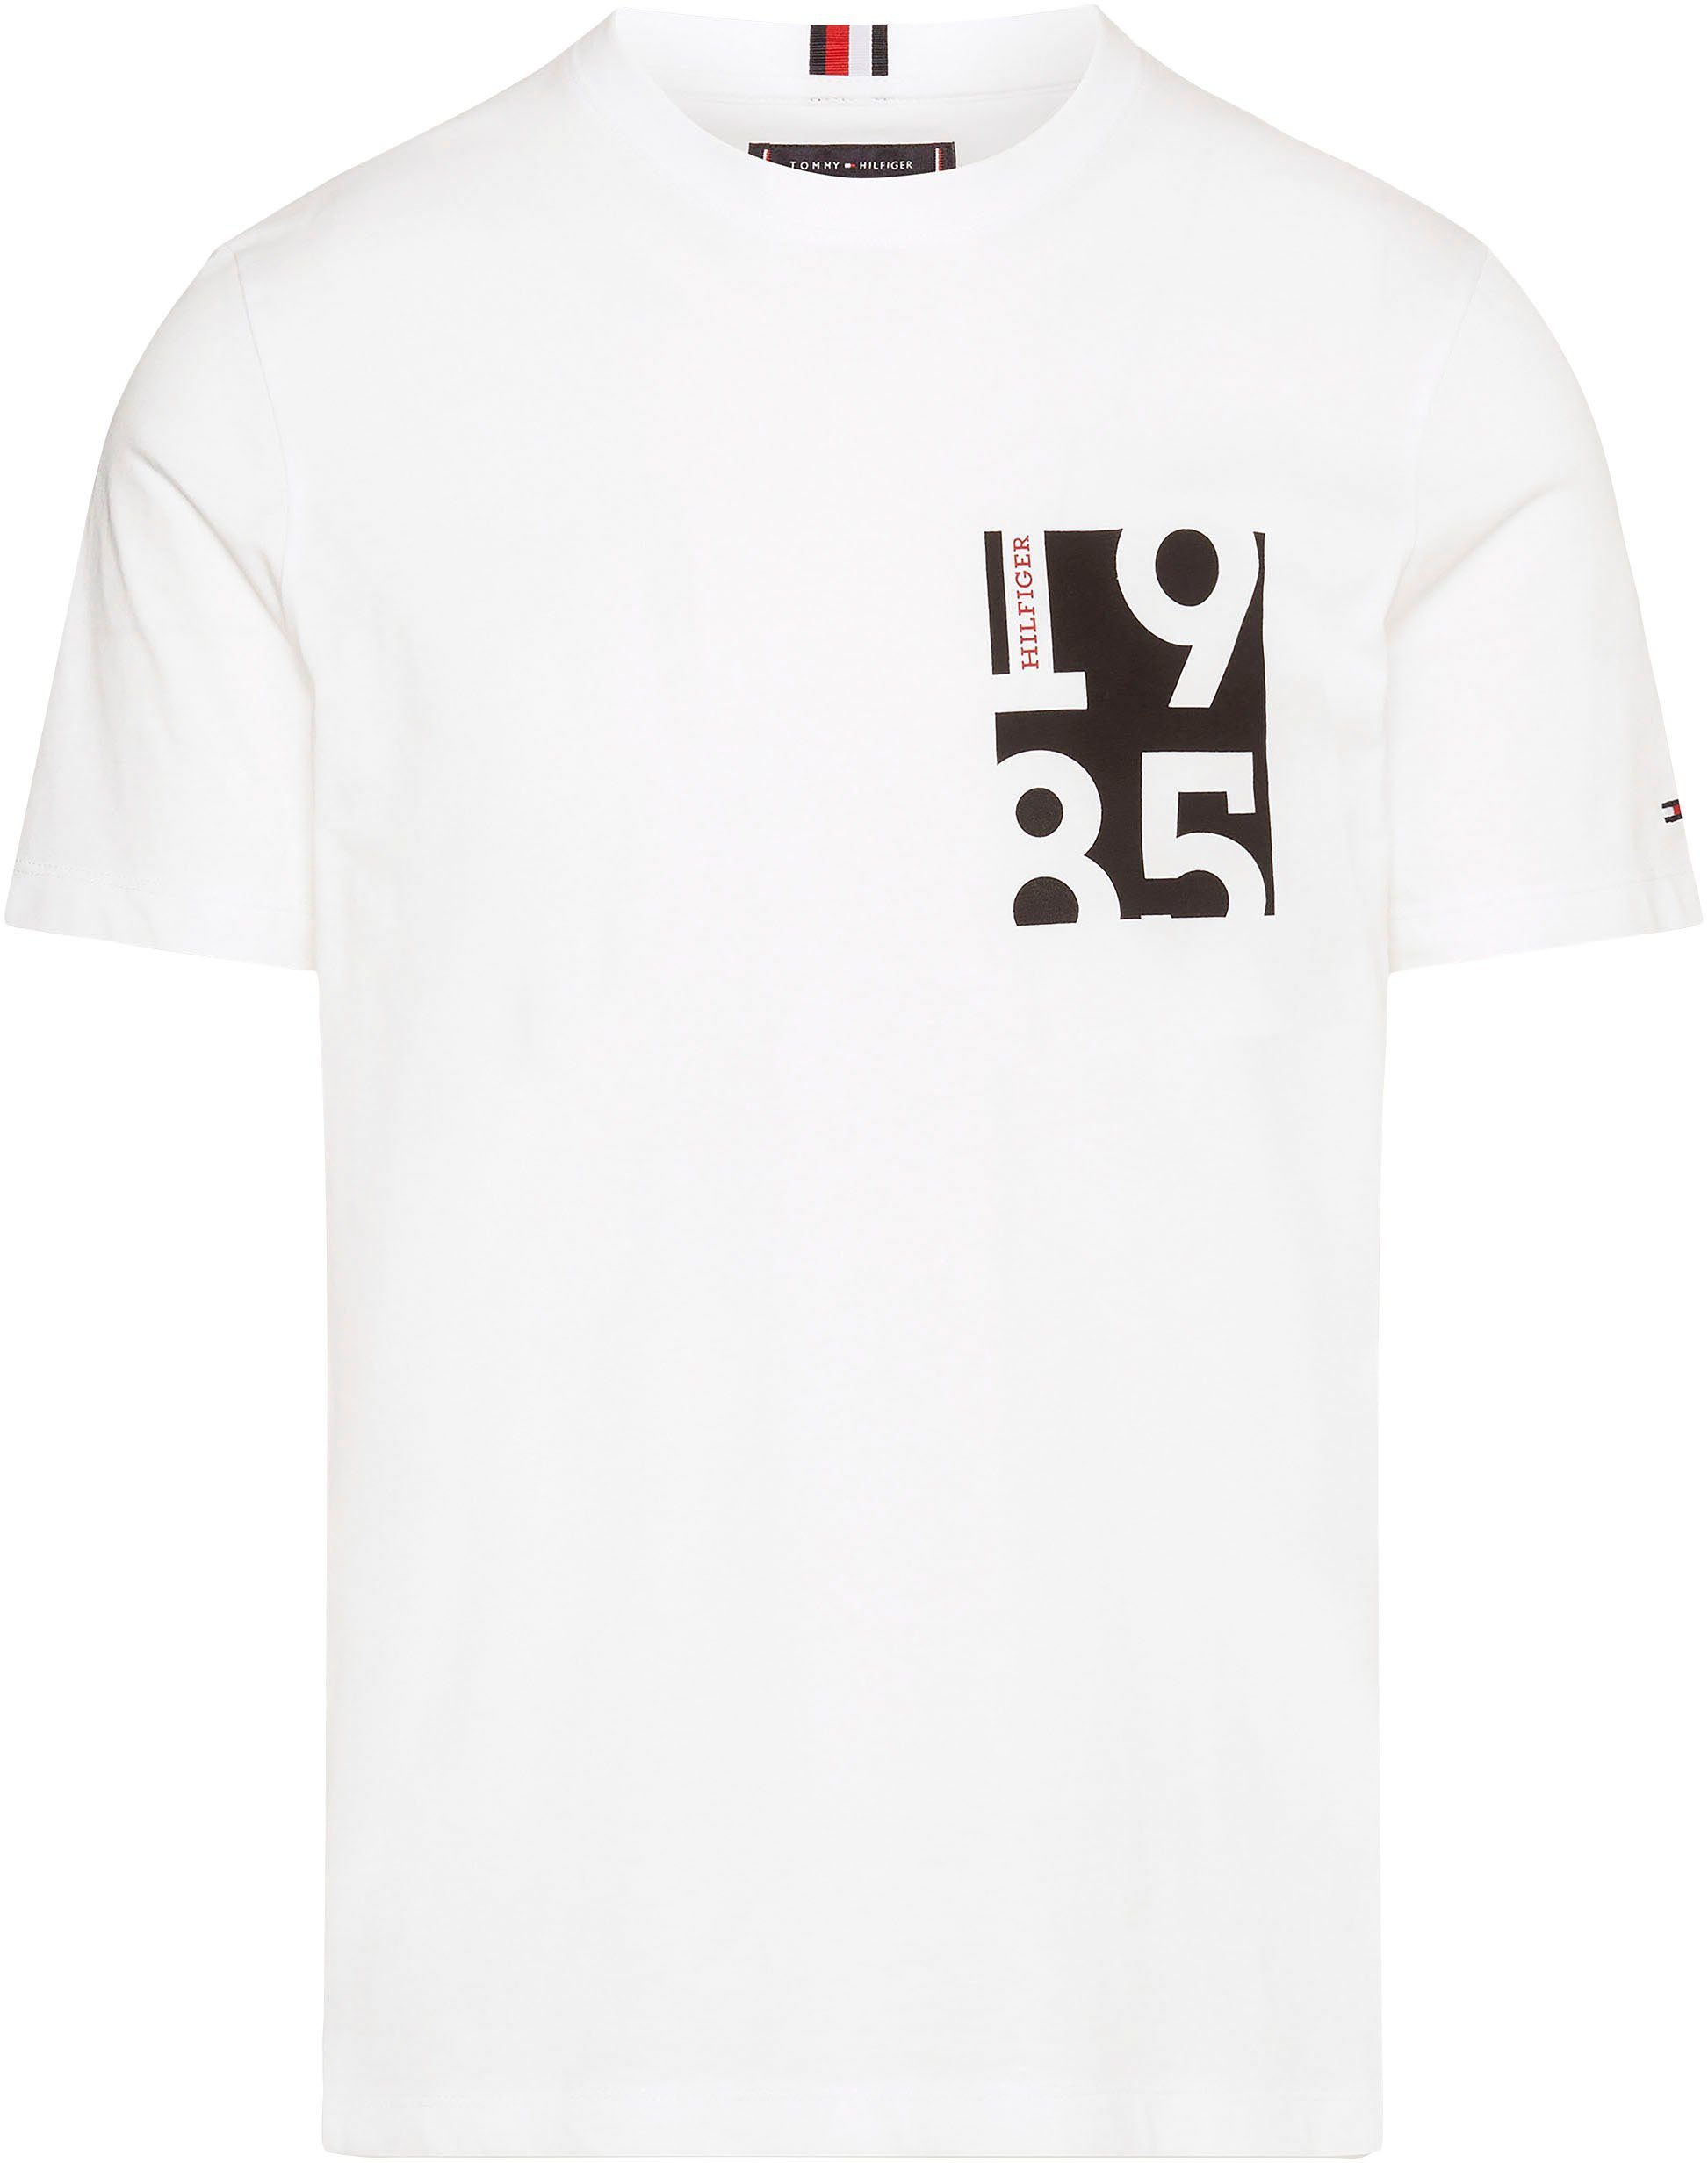 Tommy Hilfiger TEE white CHEST PRINT T-Shirt